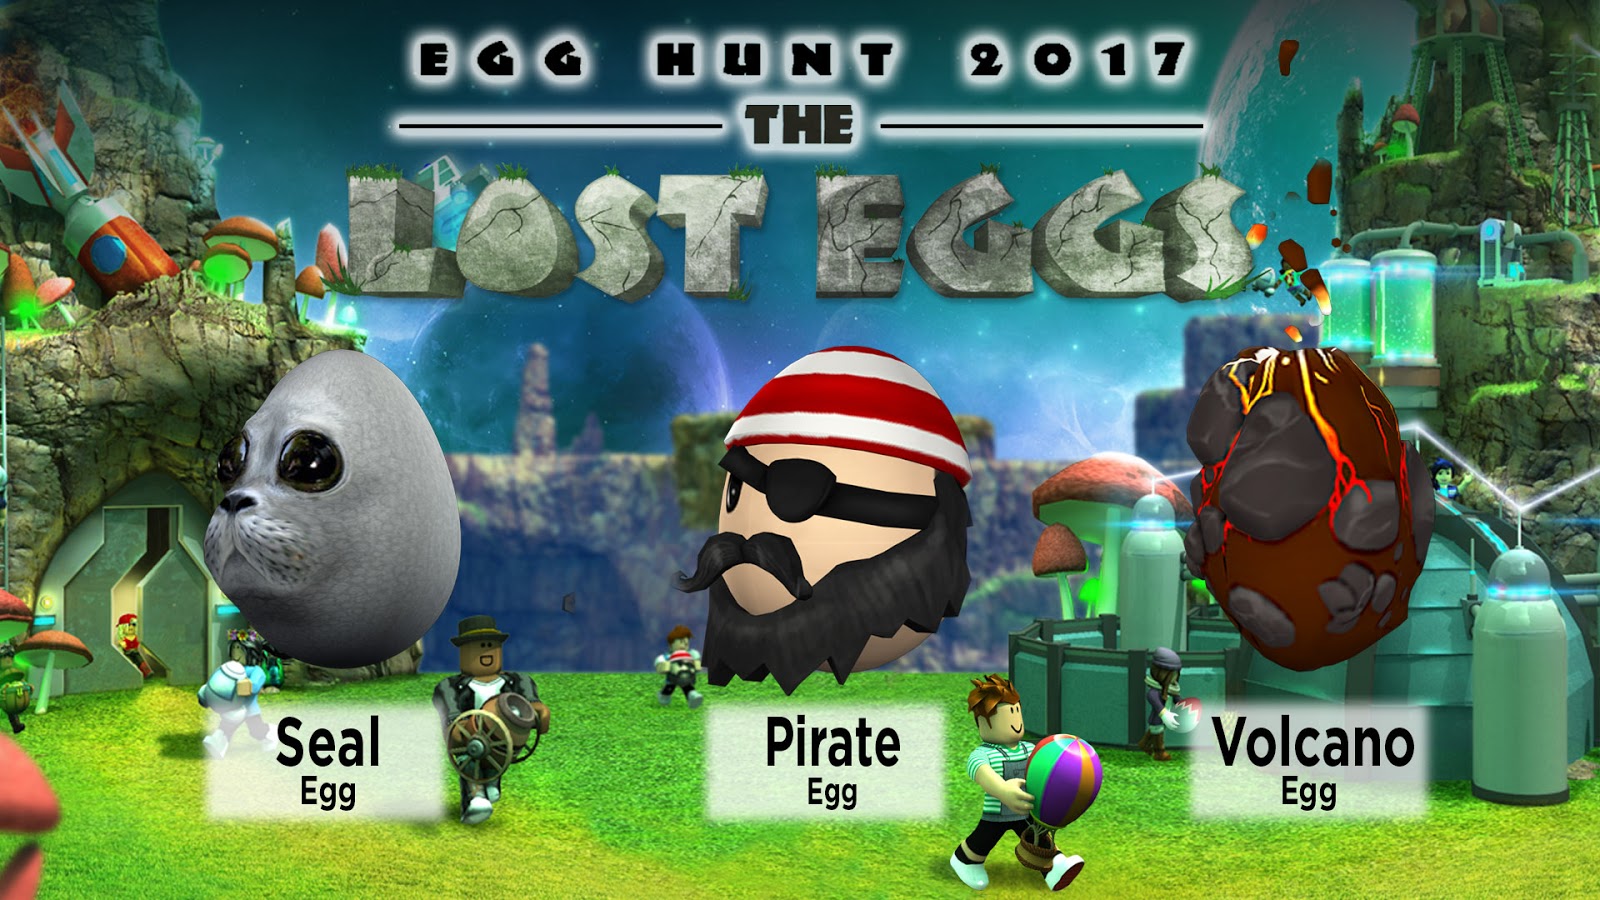 Giveaway Roblox Egg Hunt Prize Pack Mommy Katie - roblox audio wolf in sheep's clothing